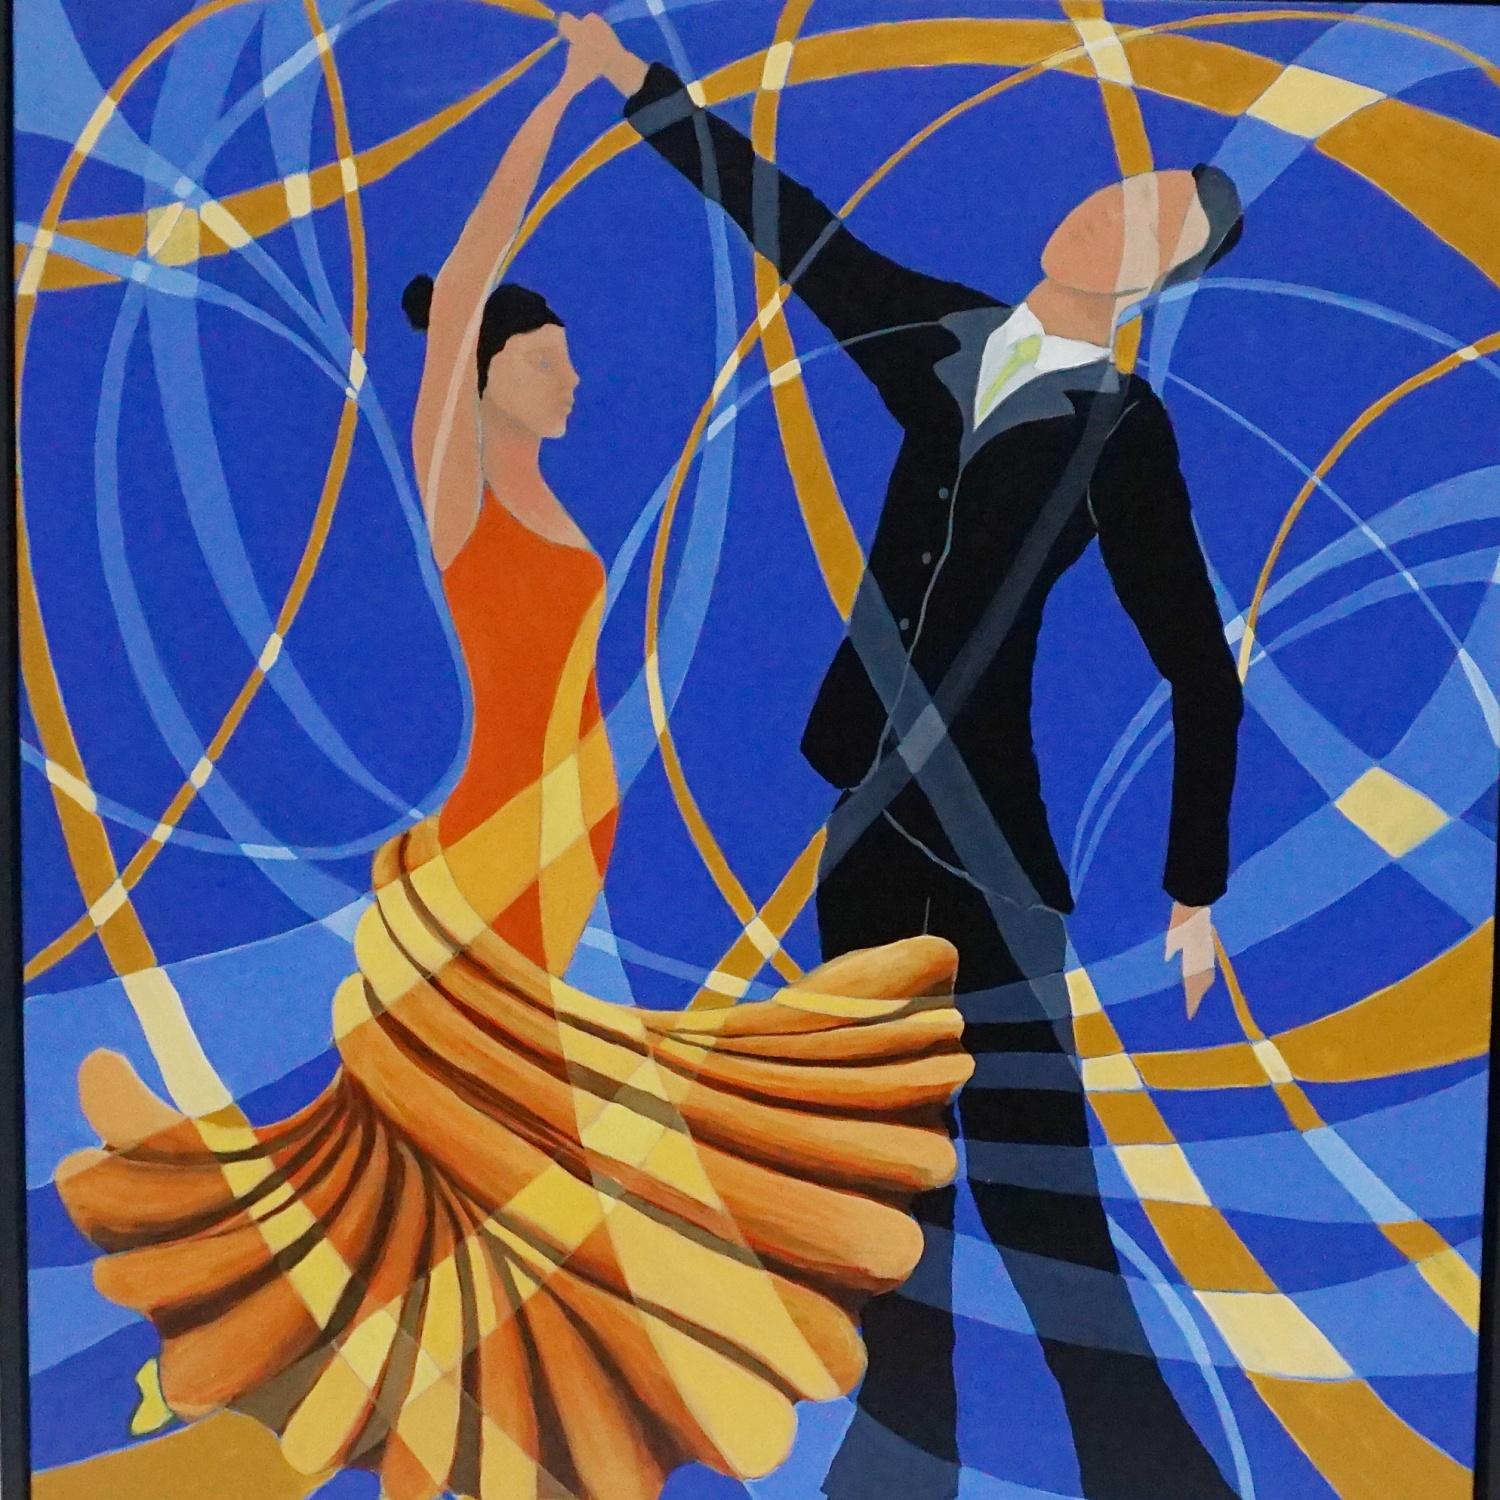 The Dance' An Art Deco Style Contemporary painting by Vera Jefferson depicting a couple dancing the Tango against an abstract background. Signed V Jefferson to lower right. 

Dimensions: H 103.5cm, W 83.5cm, D 5cm

 Vera Jefferson trained at